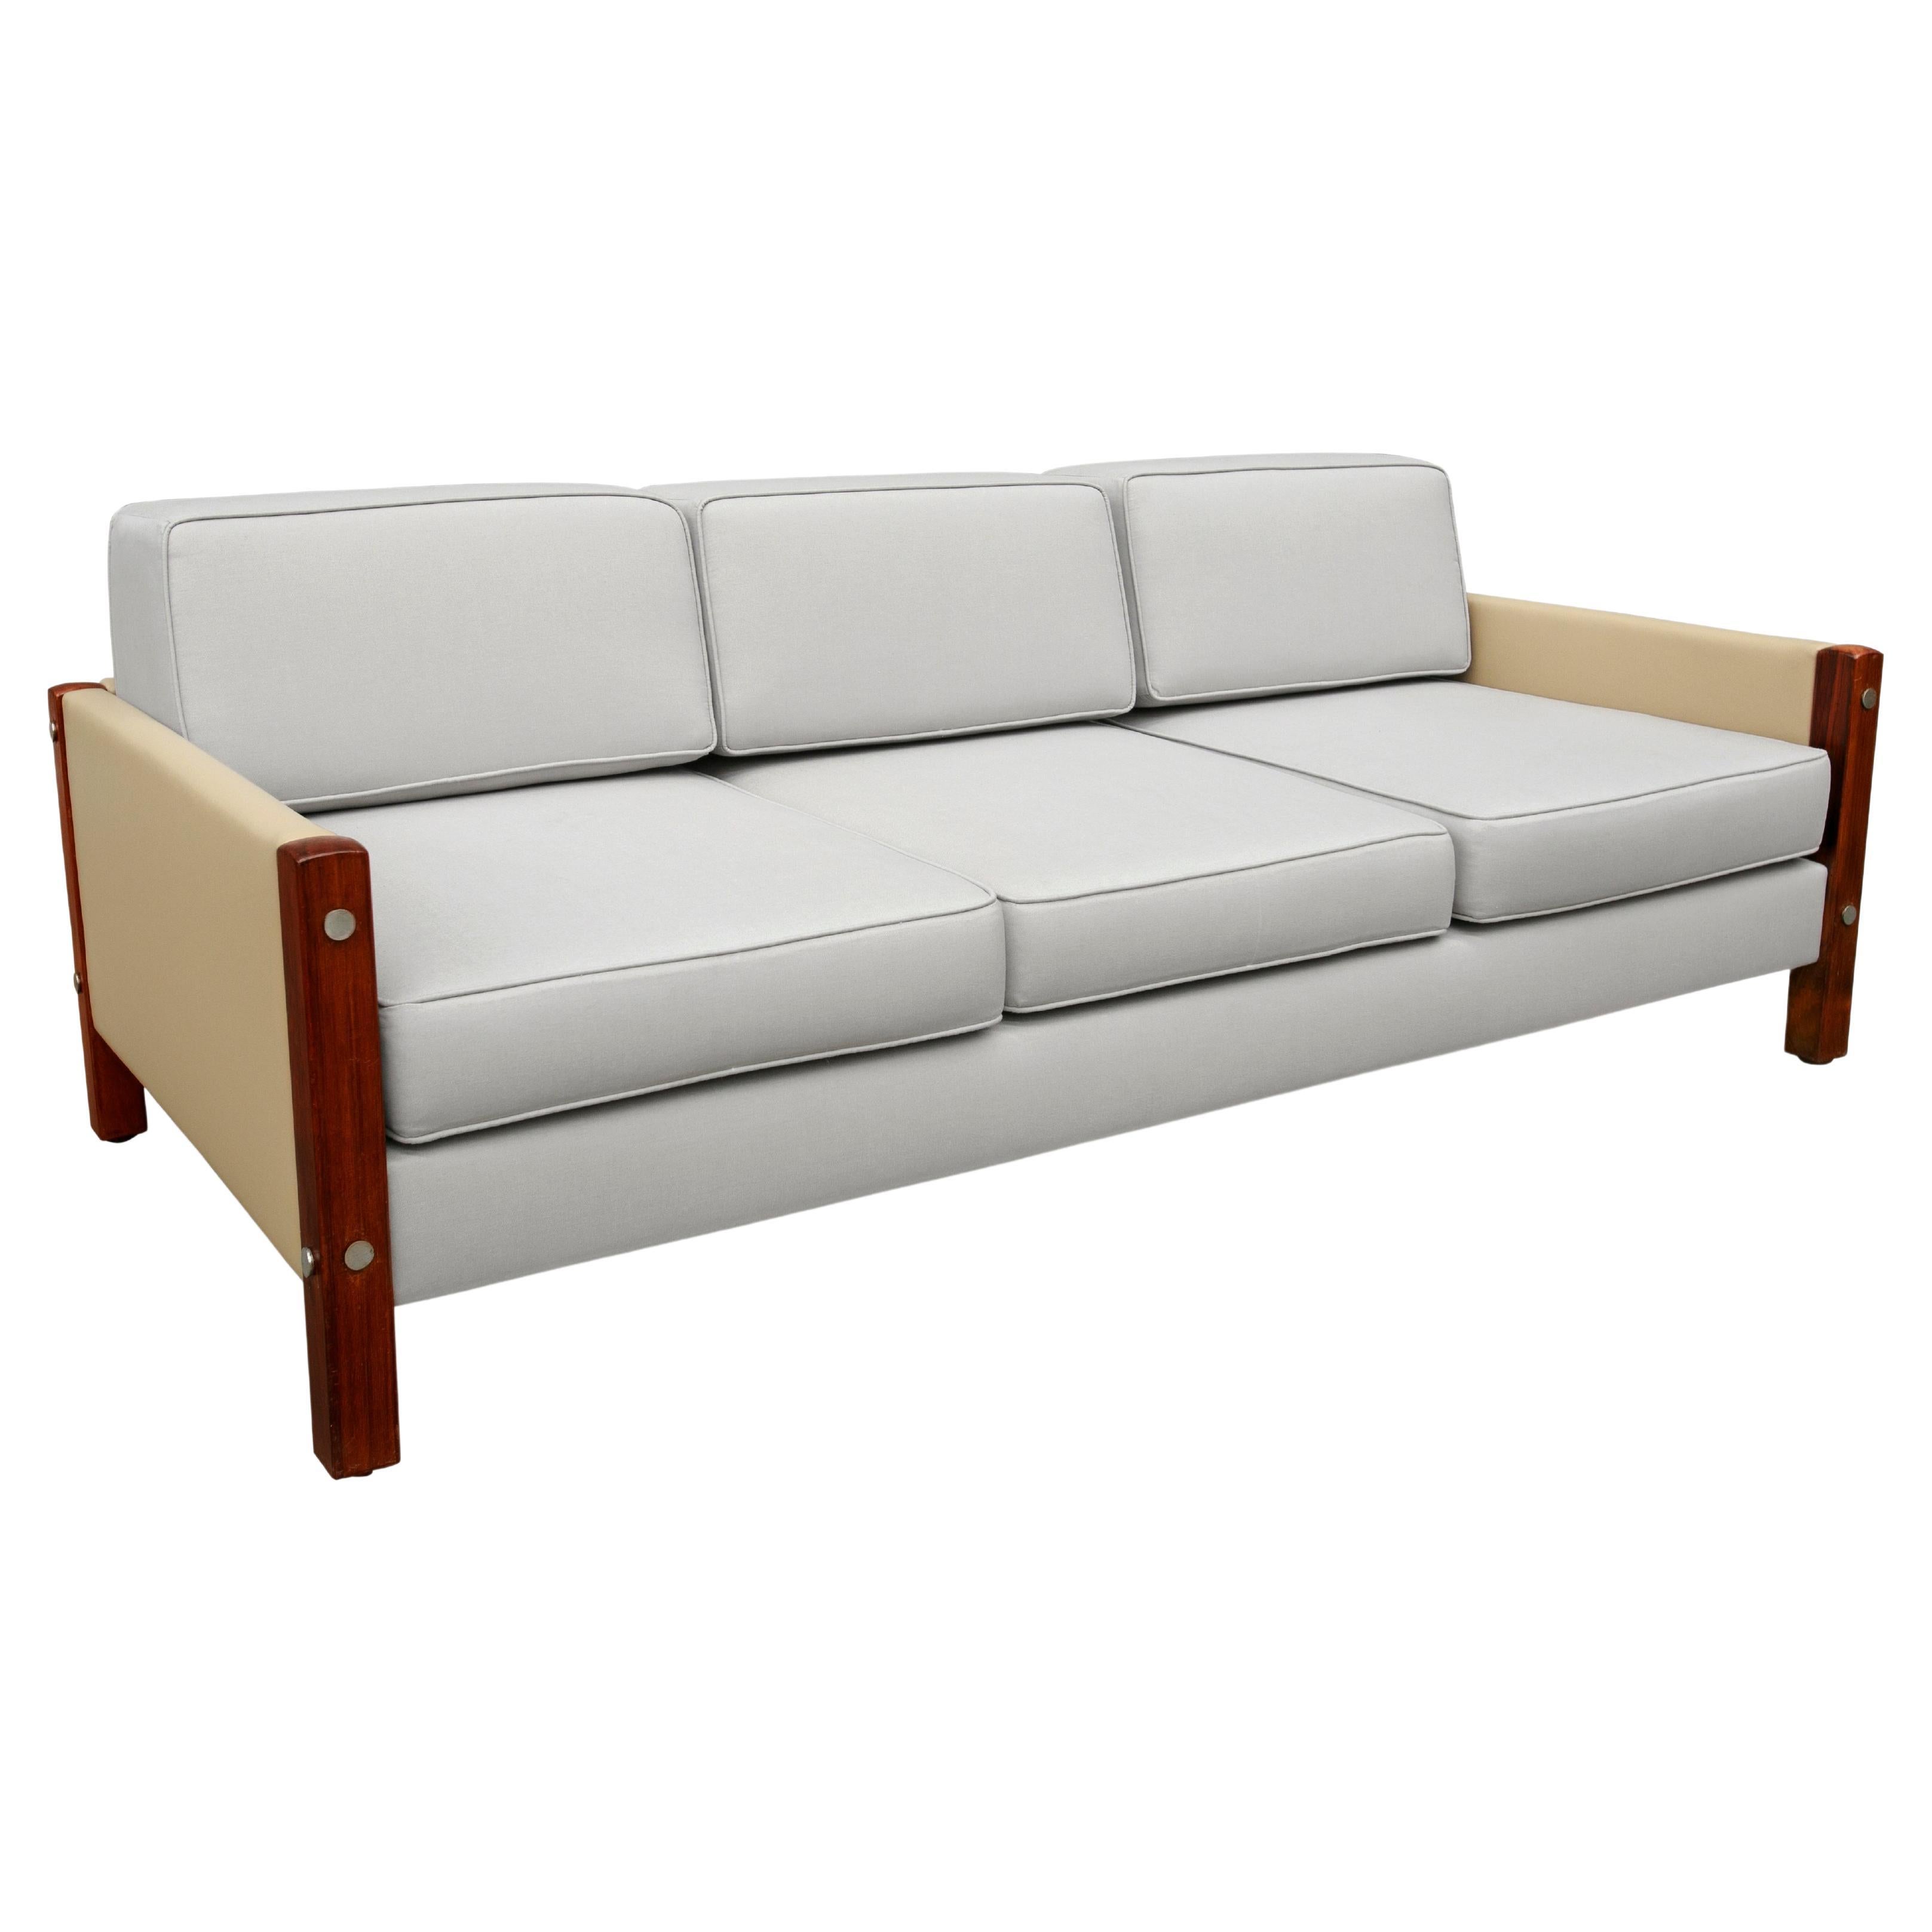 Brazilian Modern Sofa in Beige Leather & Grey Fabric by Sergio Rodrigues, Brazil For Sale